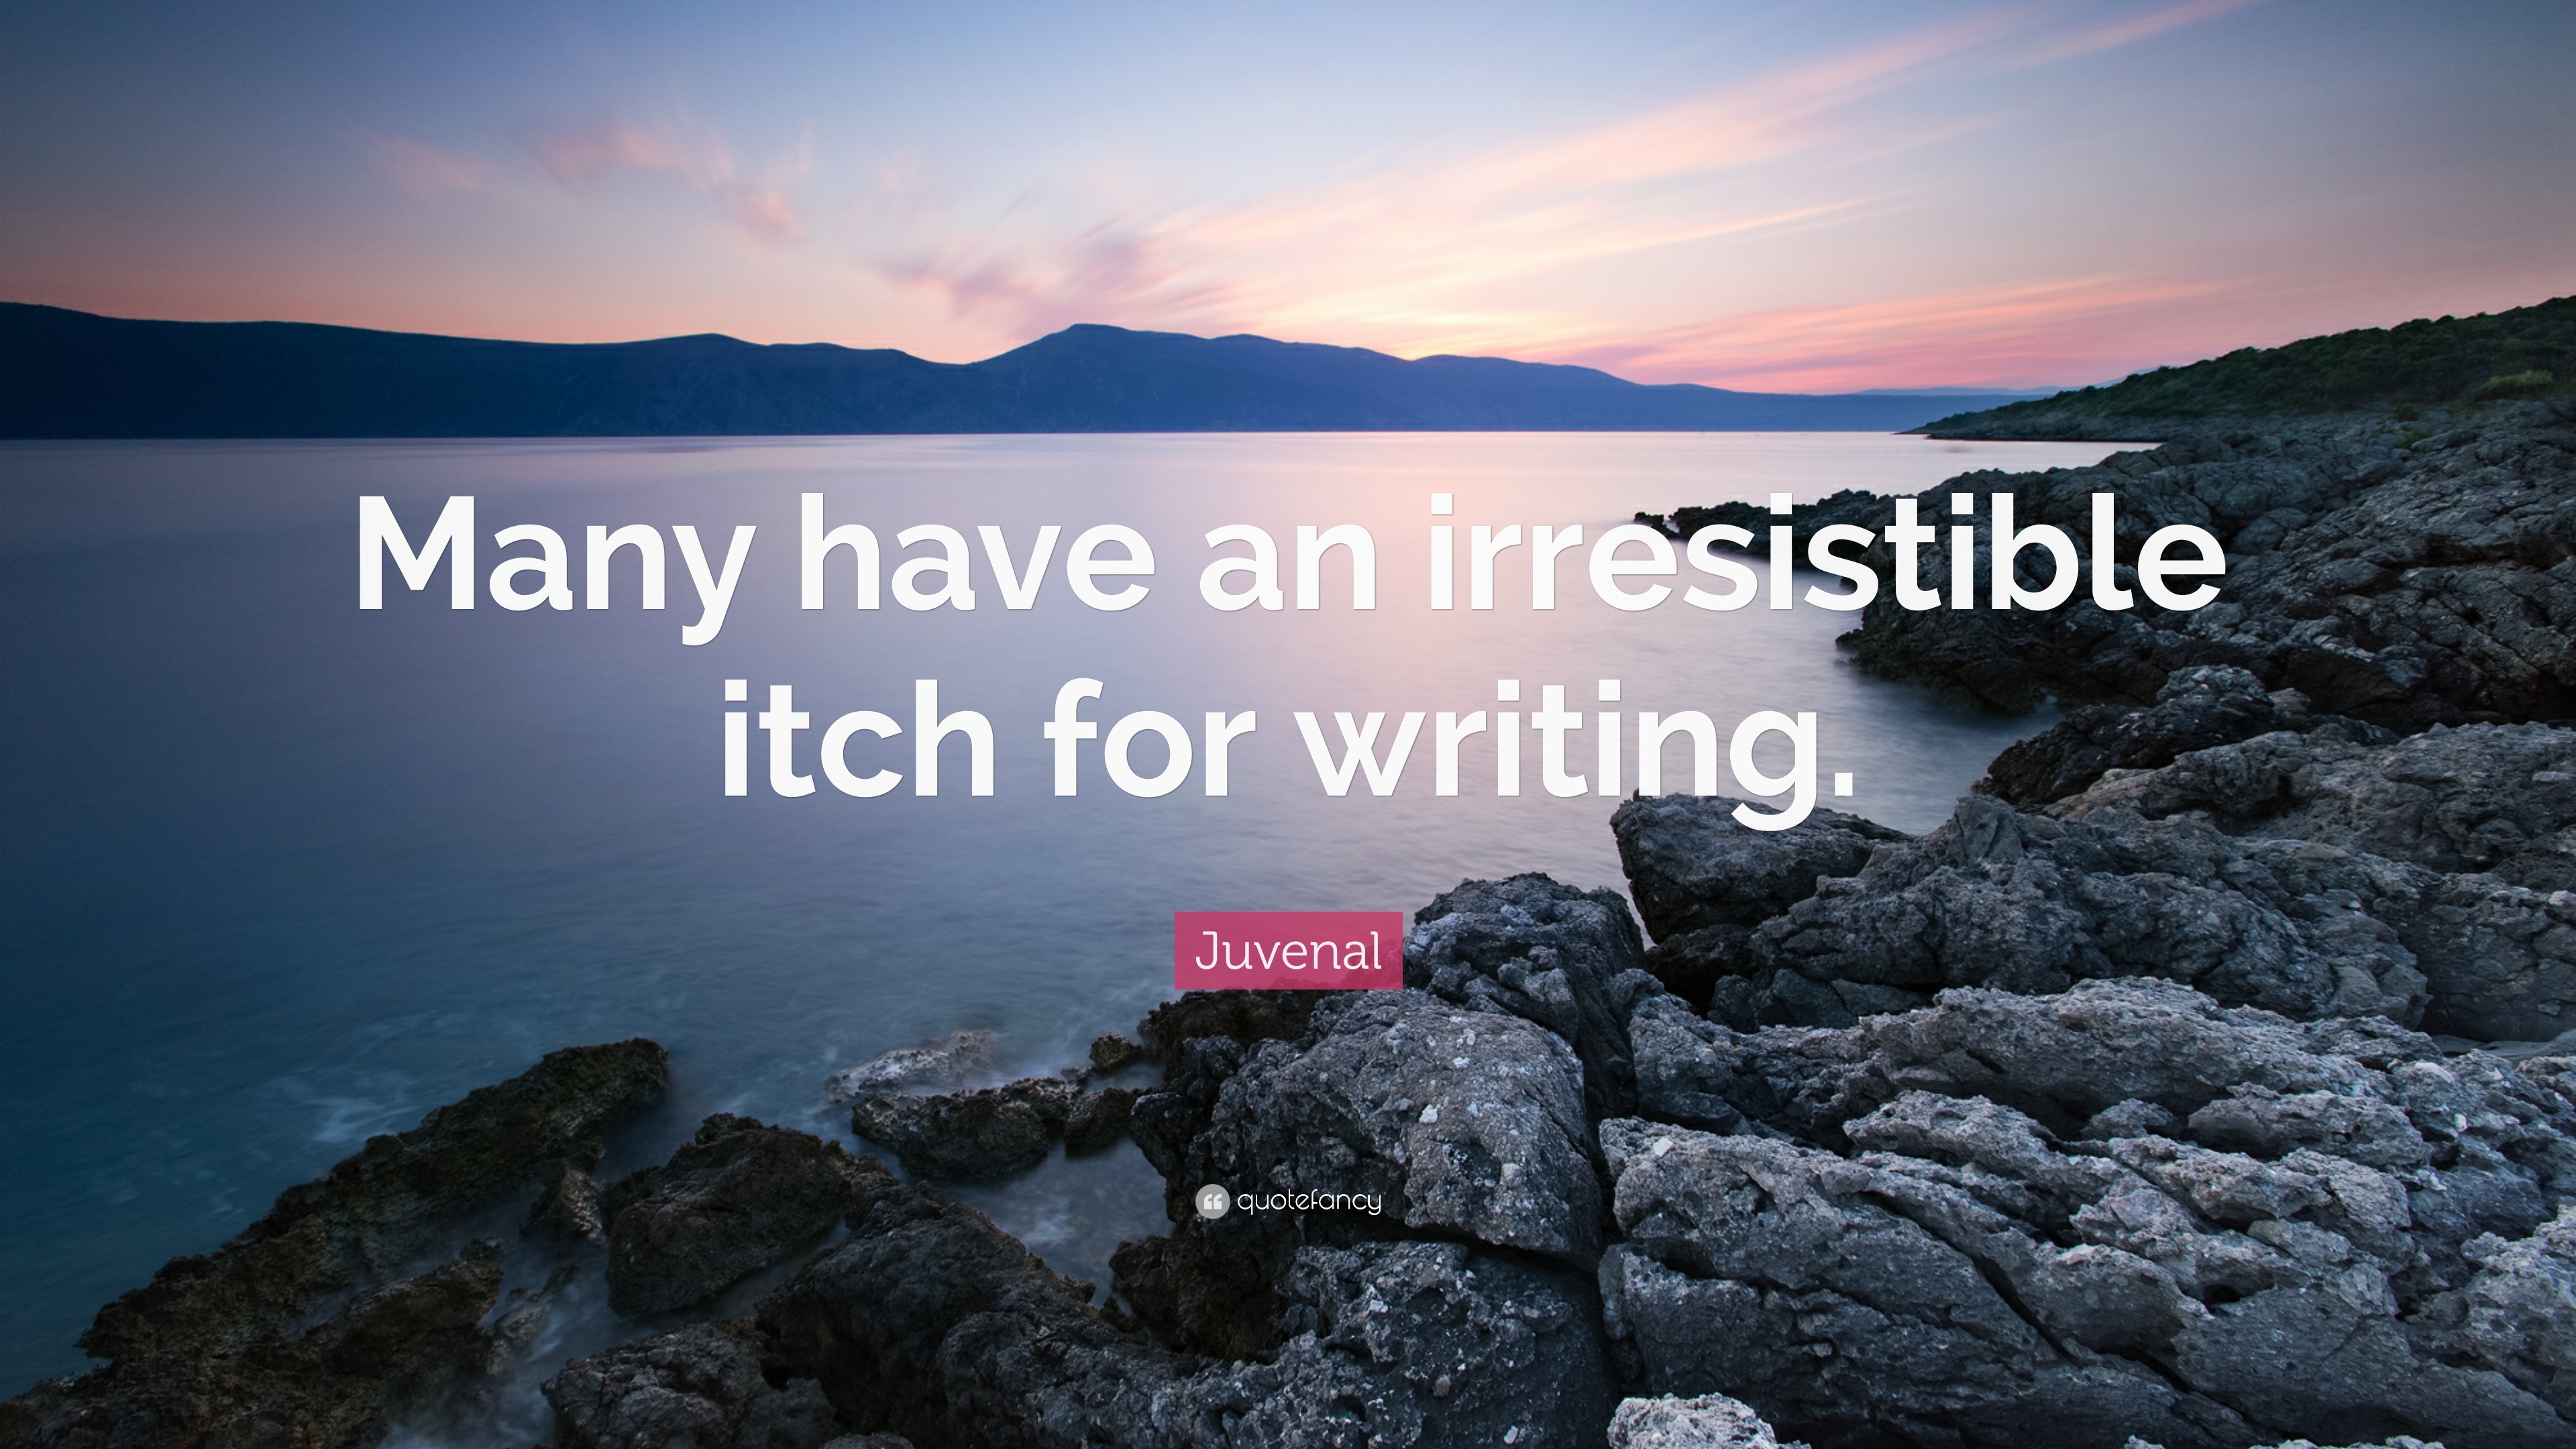 Juvenal Quote: “Many have an irresistible itch for writing.”